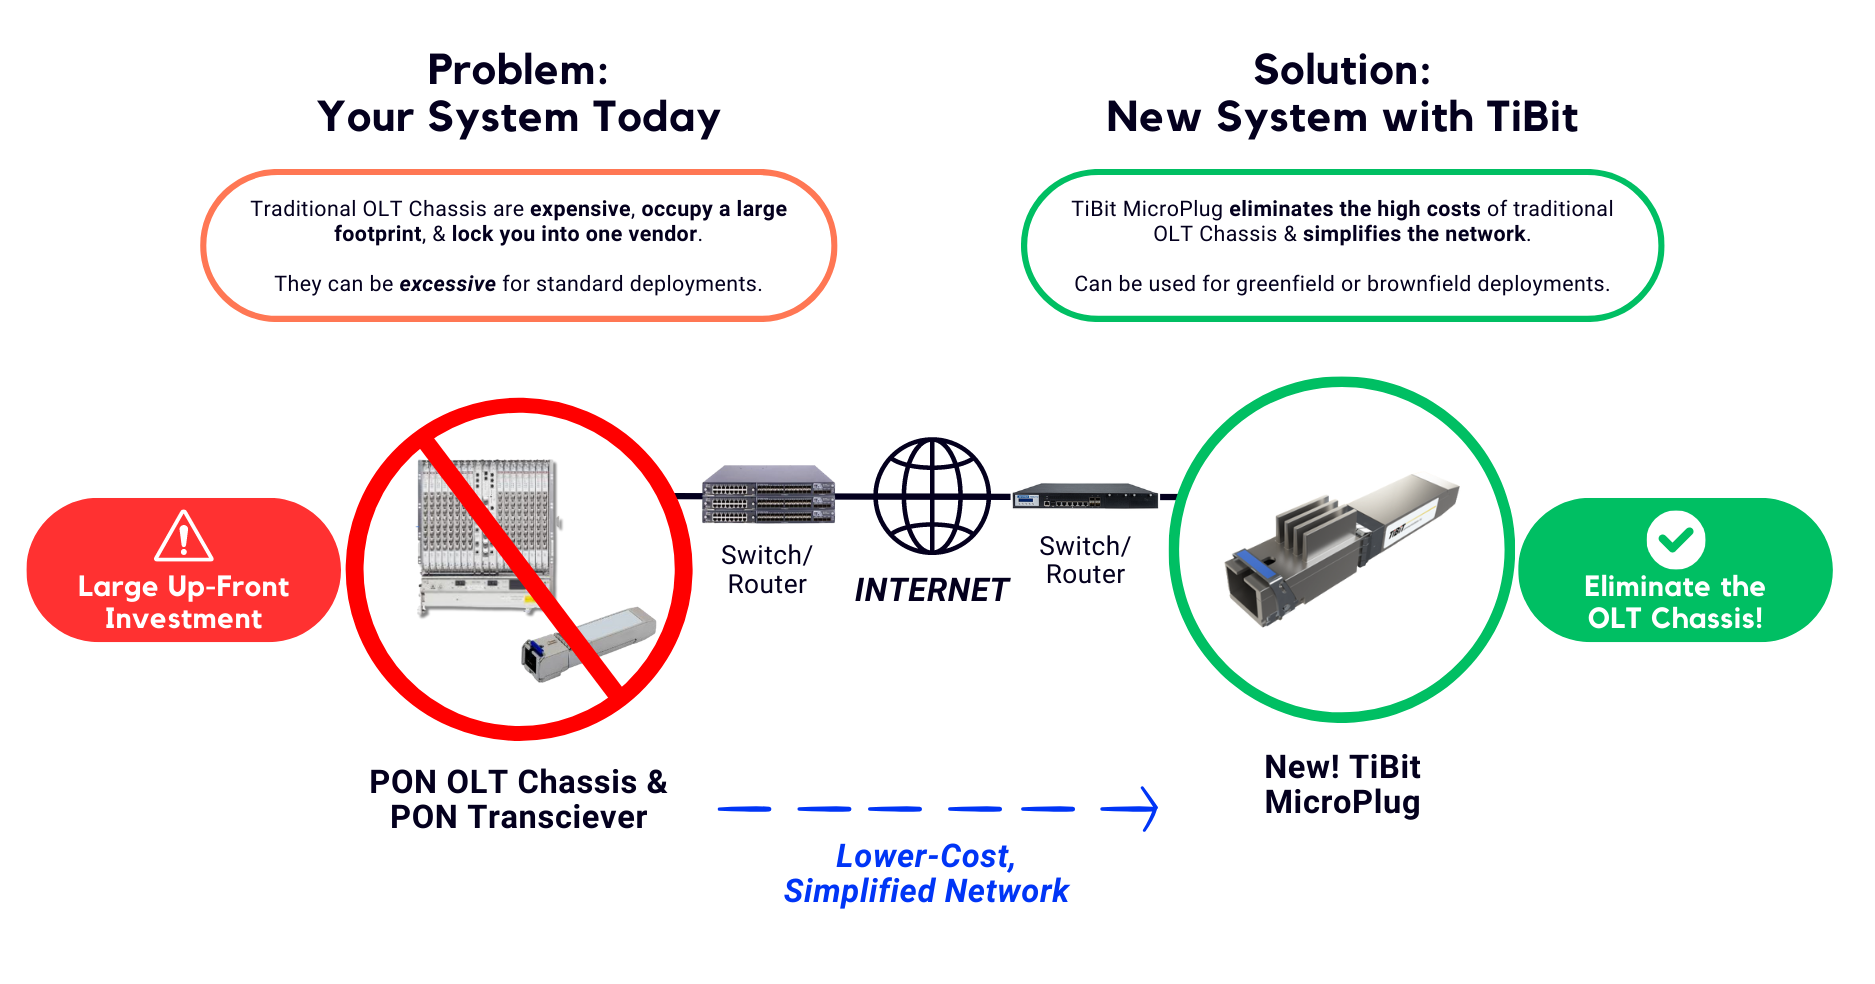 New Fiber Solution Enables the deployment of 10G XGS-PON directly from industry-standard switches.